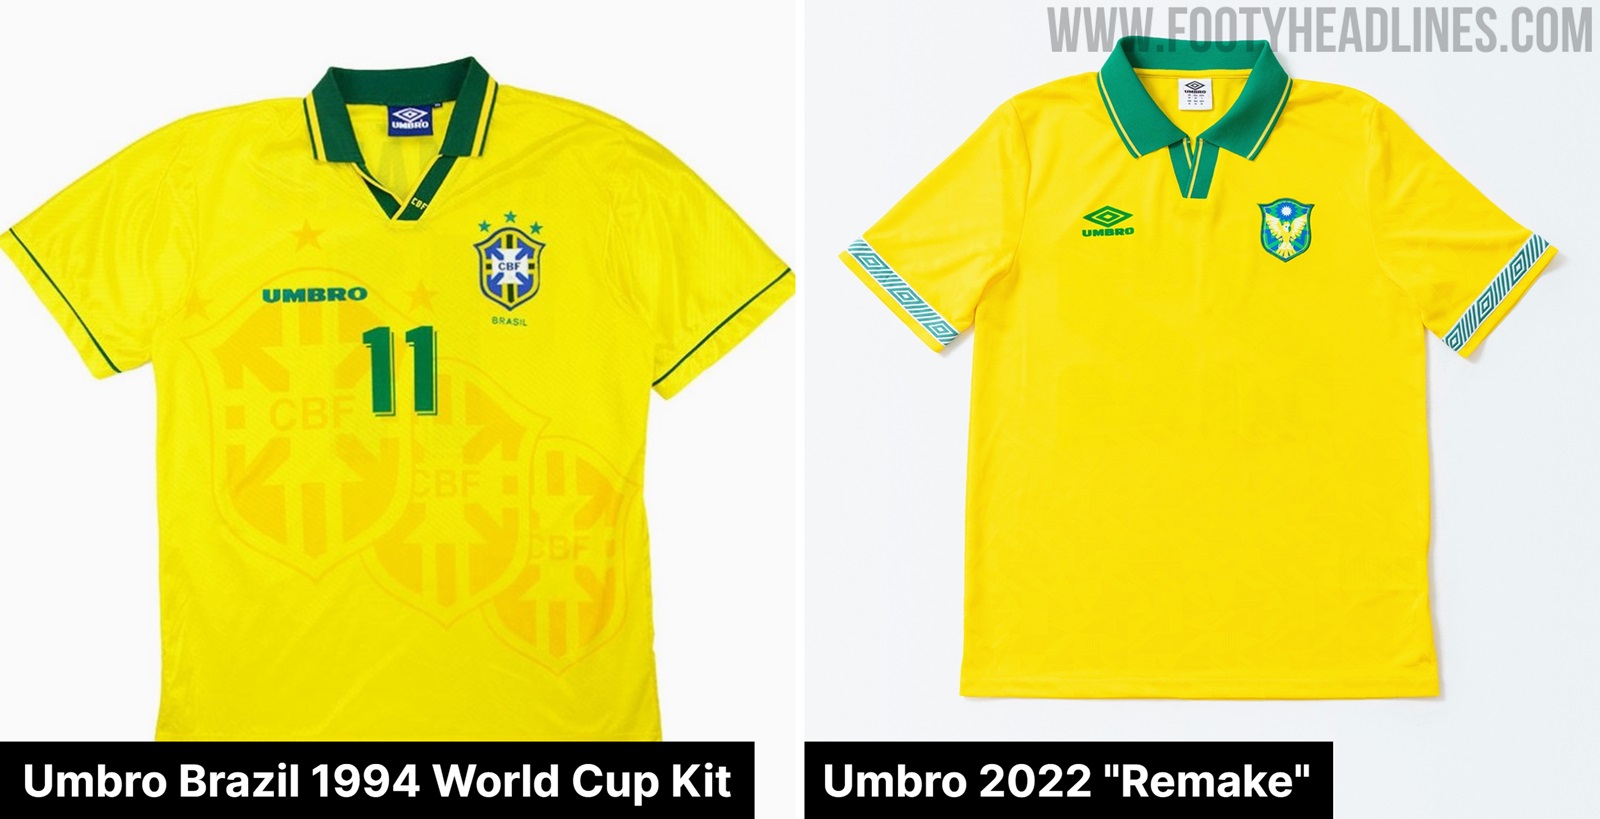 Brazil Federation Sue Umbro for Relaunching 1994 World Cup Kit